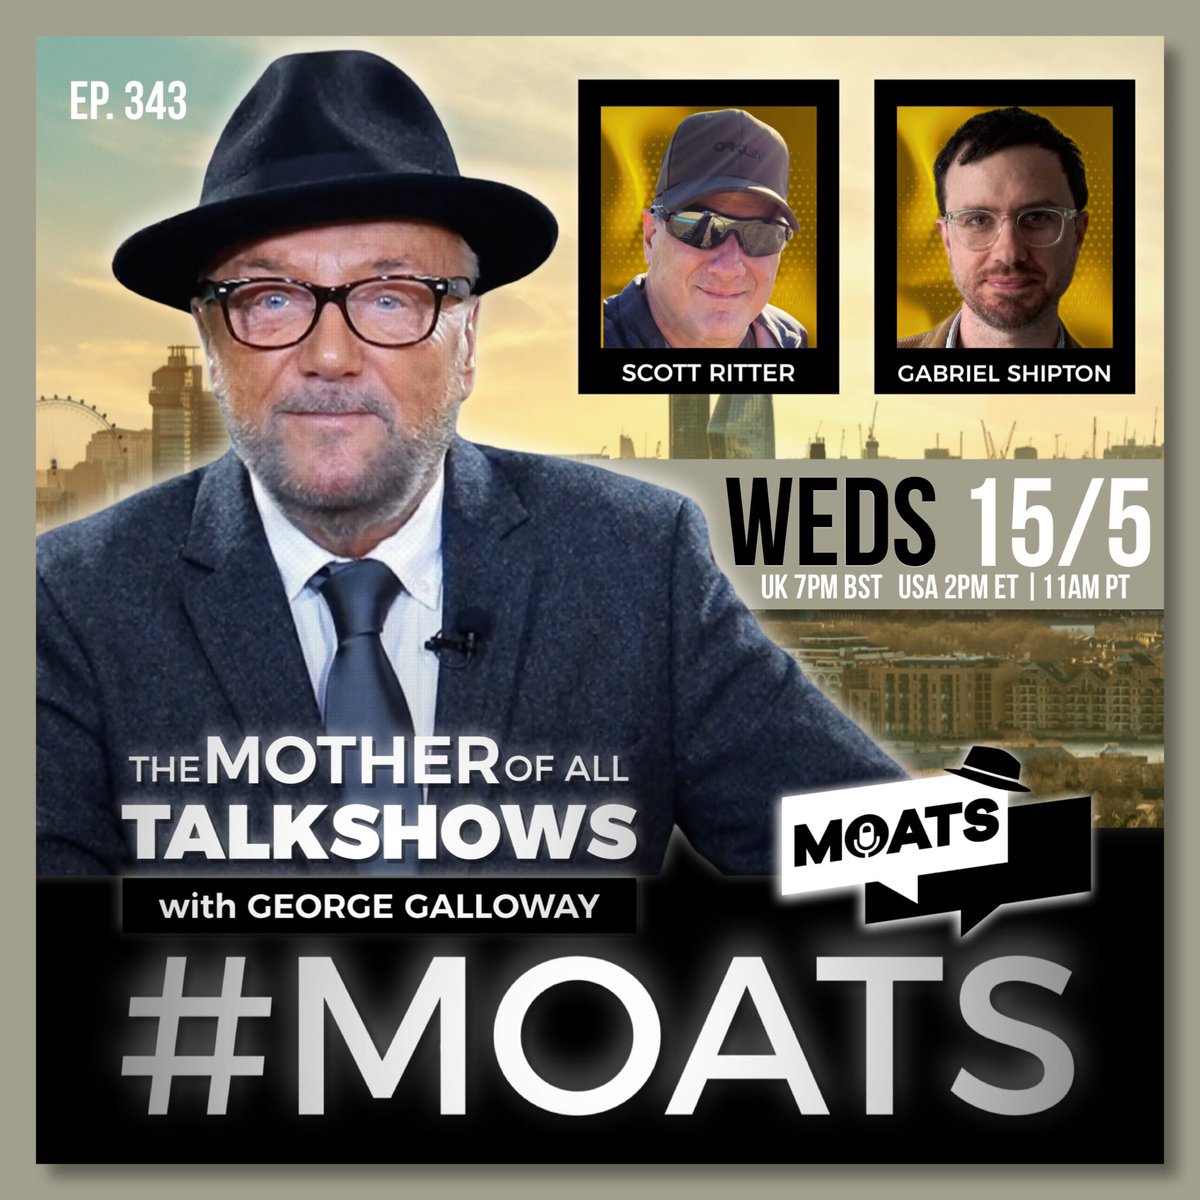 #WEDNESDAY Join The Mother of All Talk Shows! With guests @RealScottRitter and @GabrielShipton 🟥 youtube.com/live/NK_i2gwBG… 🟩 rumble.com/v4uxbke-moats-… #MOATS WATCH #LIVE 🇬🇧 7PM BST LONDON 🇺🇸 11AM PDT | 2PM EDT #Gaza #StudentProtests #Palestine #Israel #Assange #Rochdale